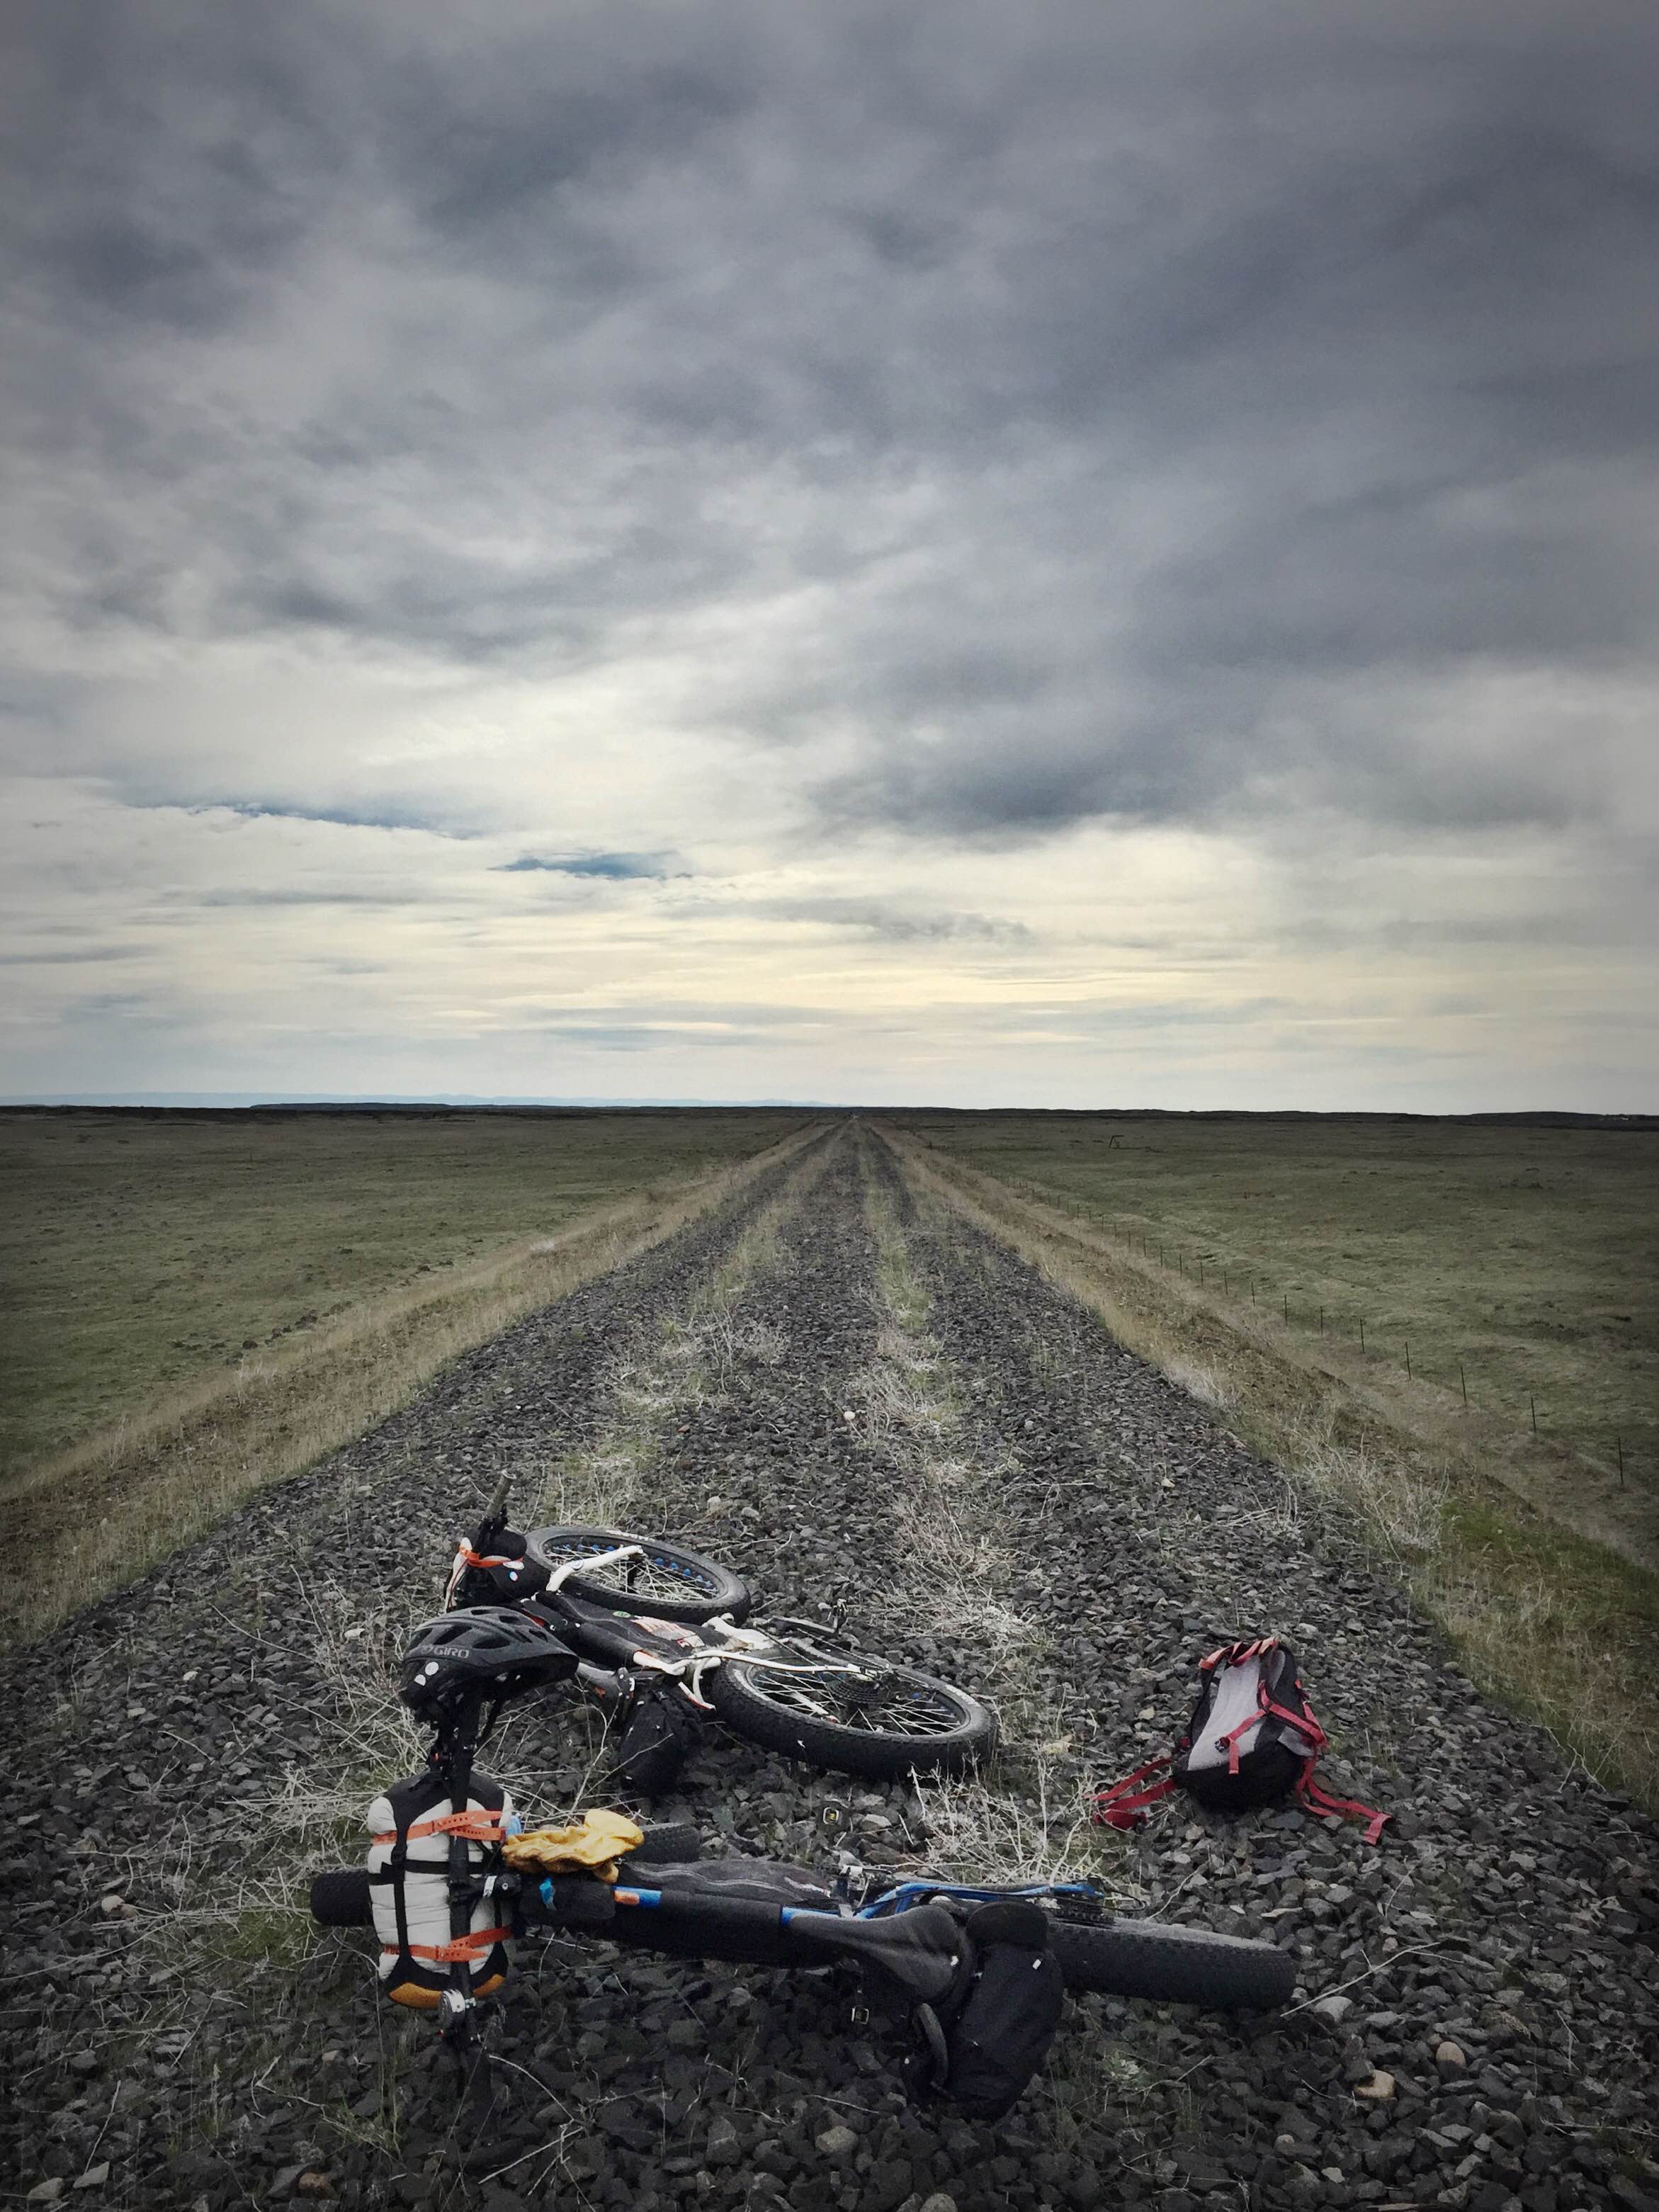 Bike-Packing TR: The Columbia Plateau Trail- The Road Not Traveled